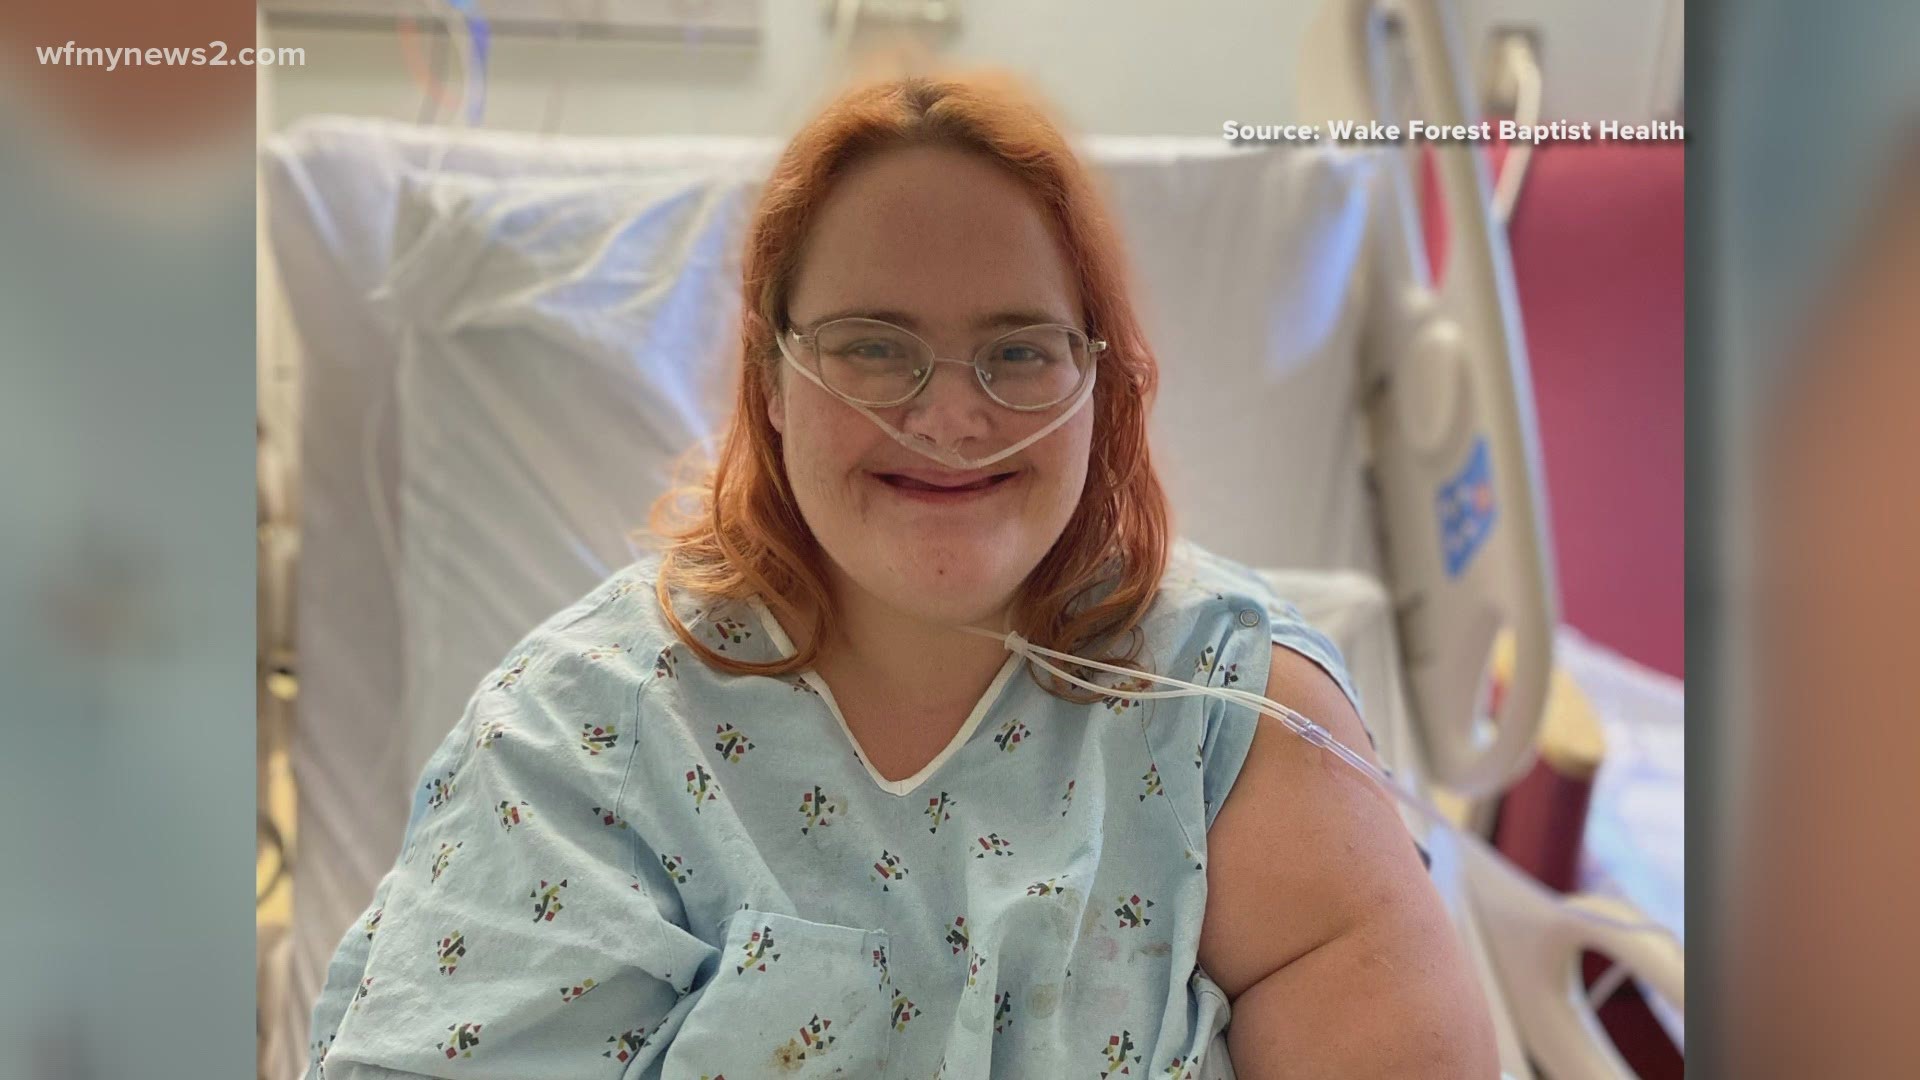 A High Point woman says she learned a hard lesson about the coronavirus. She didn't get vaccinated and she regrets the decision after ending up in the hospital.